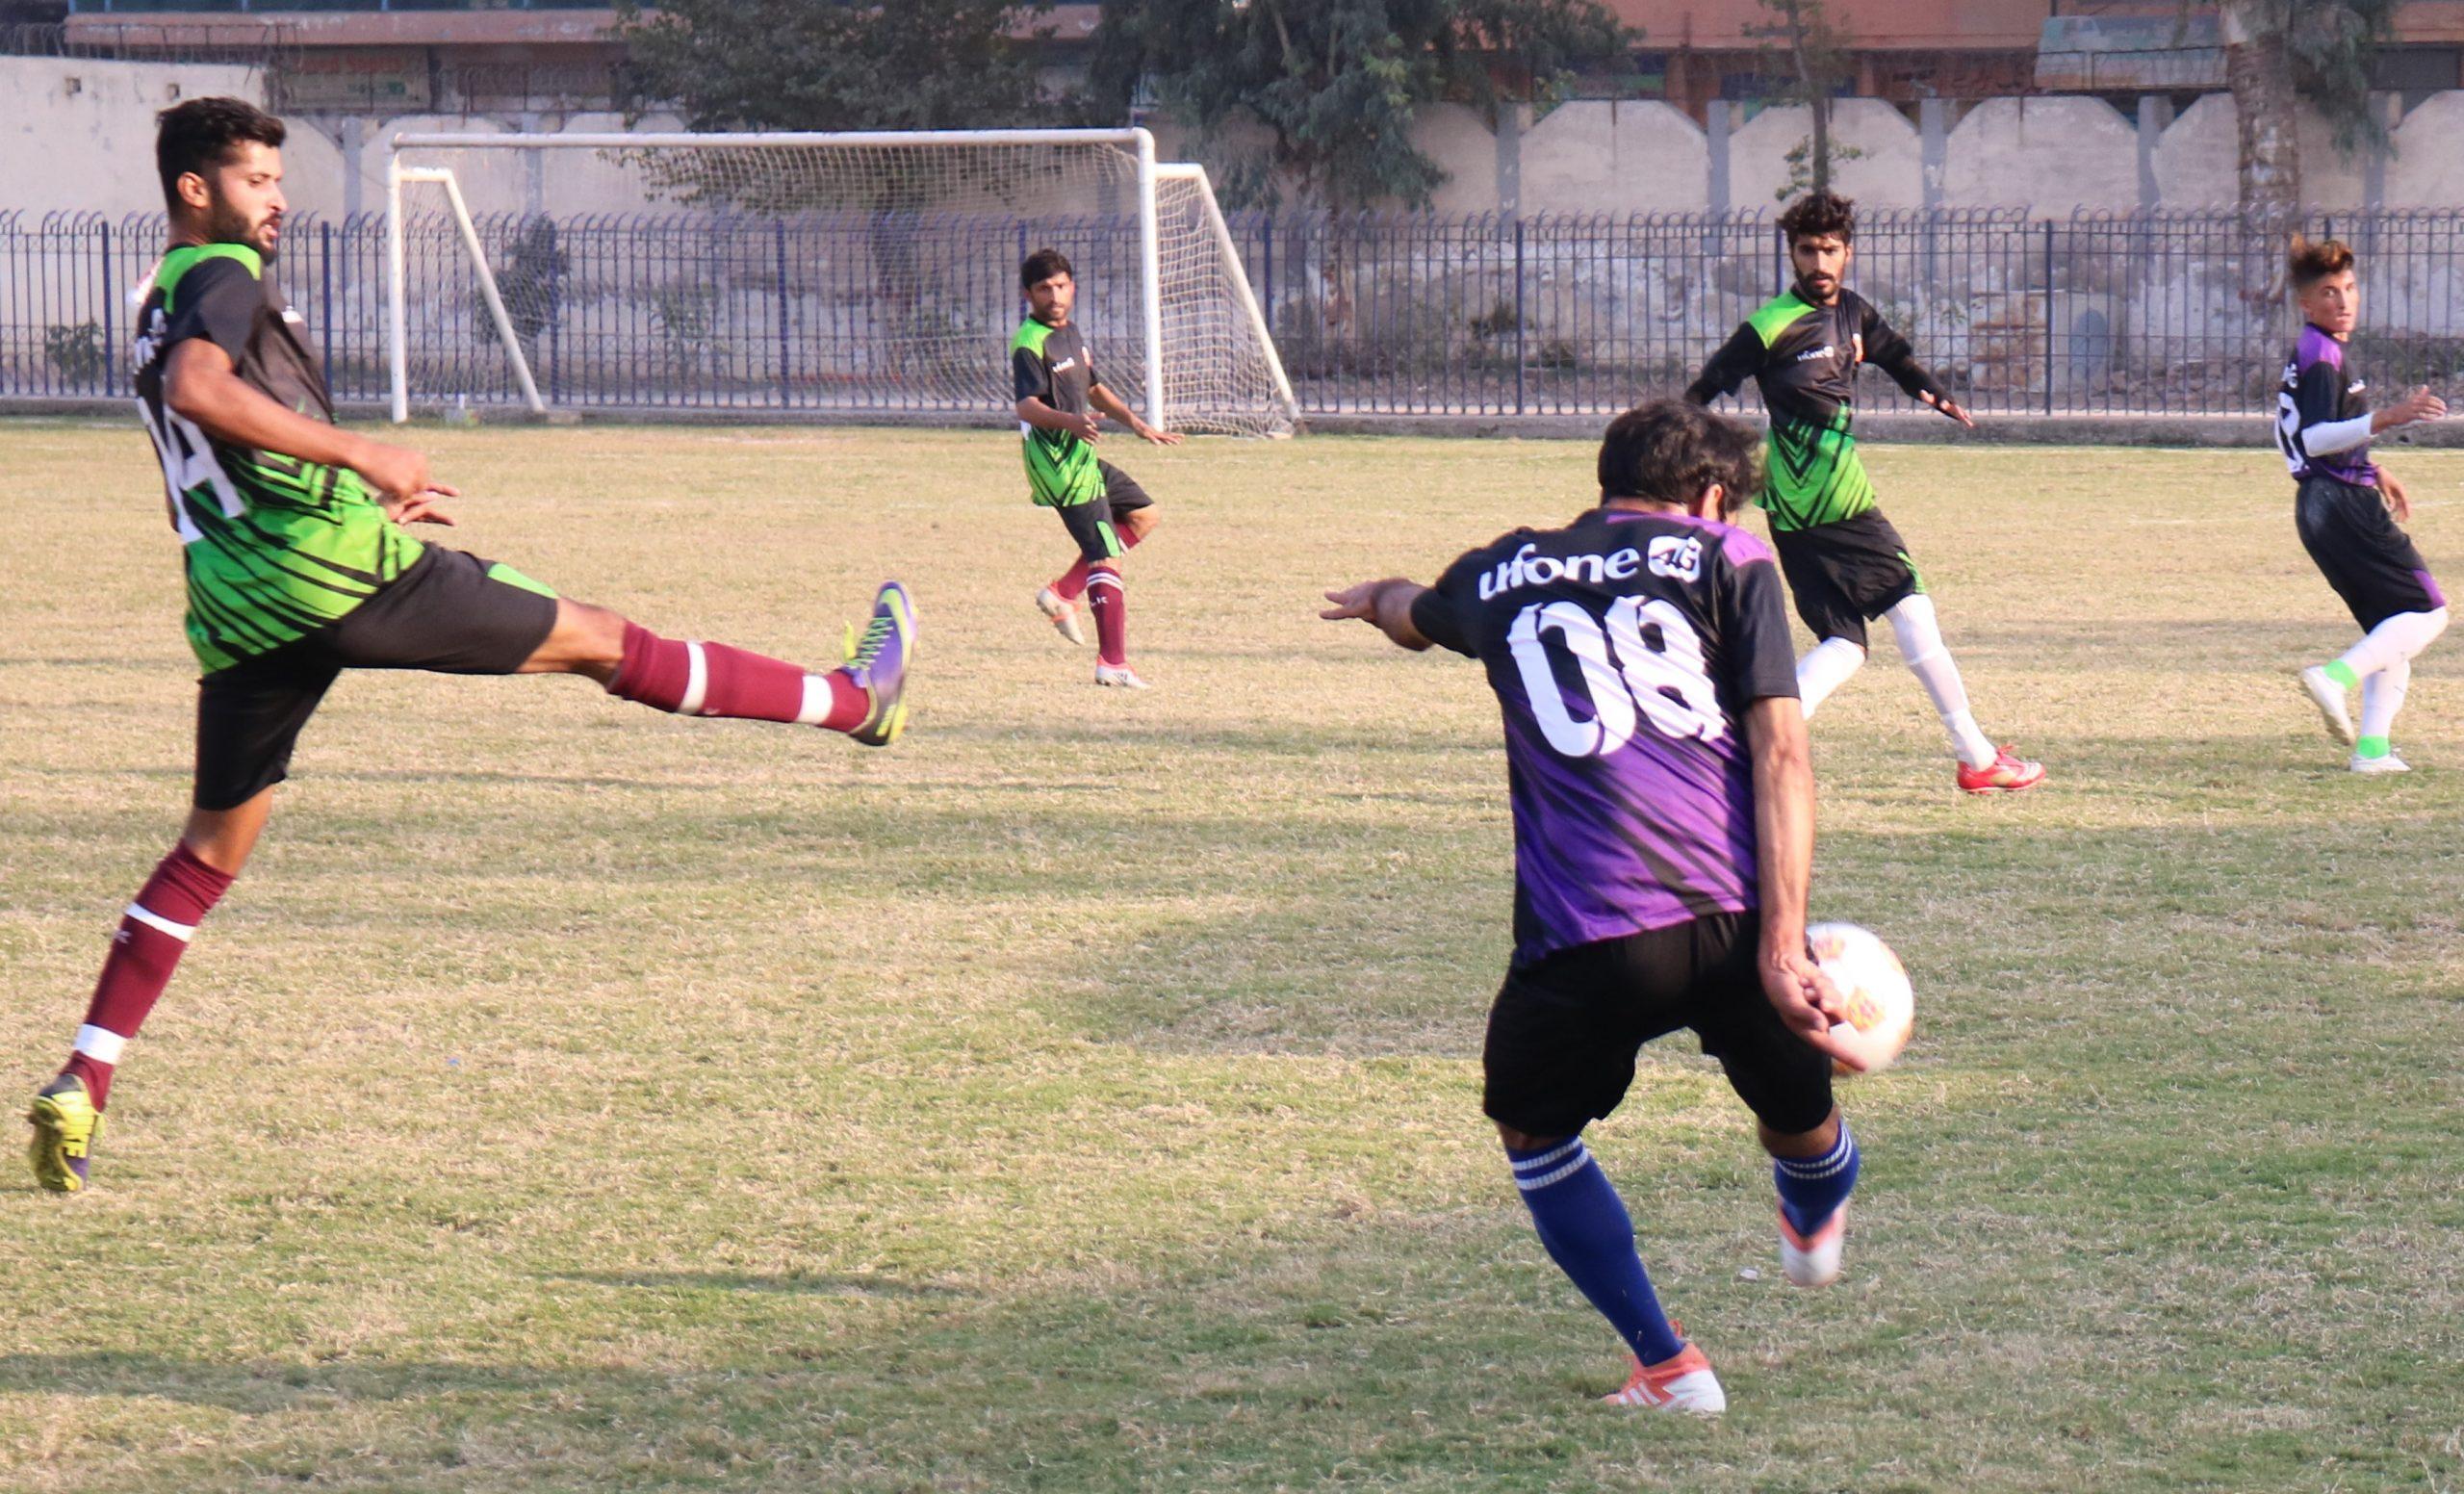 Ufone Football Cup Eliminator round draws to conclusion in Balochistan while KP catches up